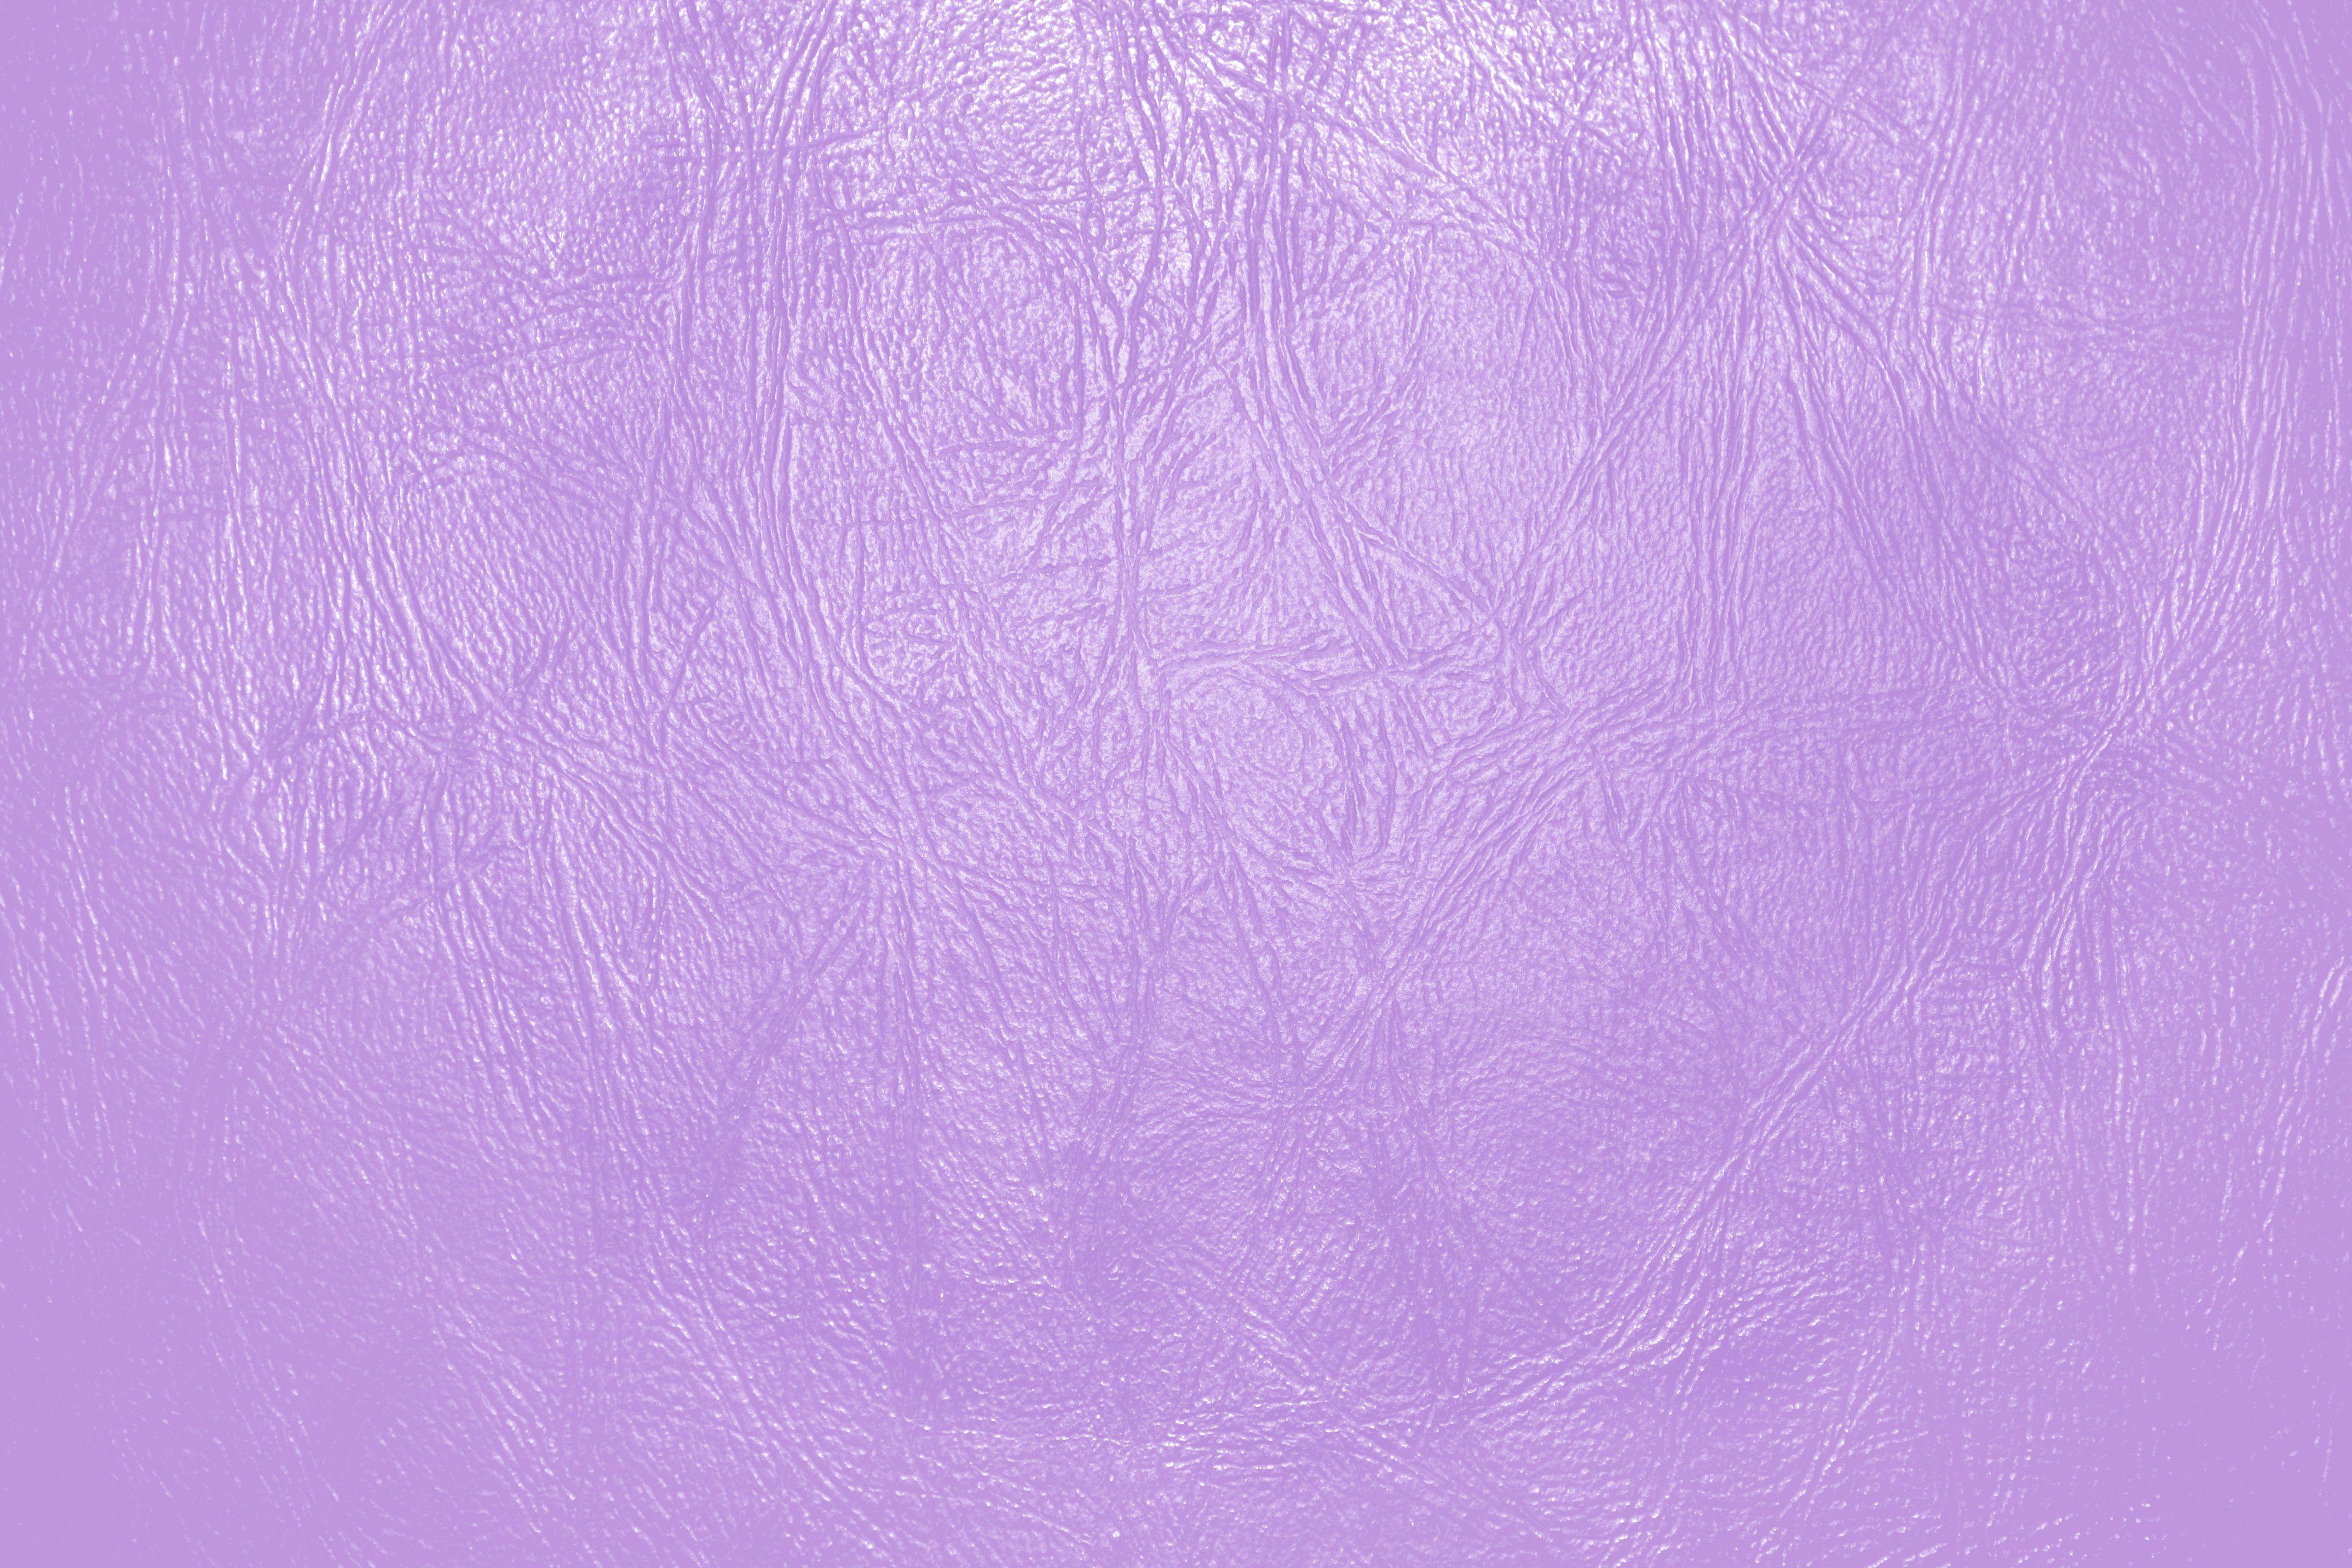 iPad Air 5 Stock Wallpaper - Ribbons - Purple Light - Wallpapers Central